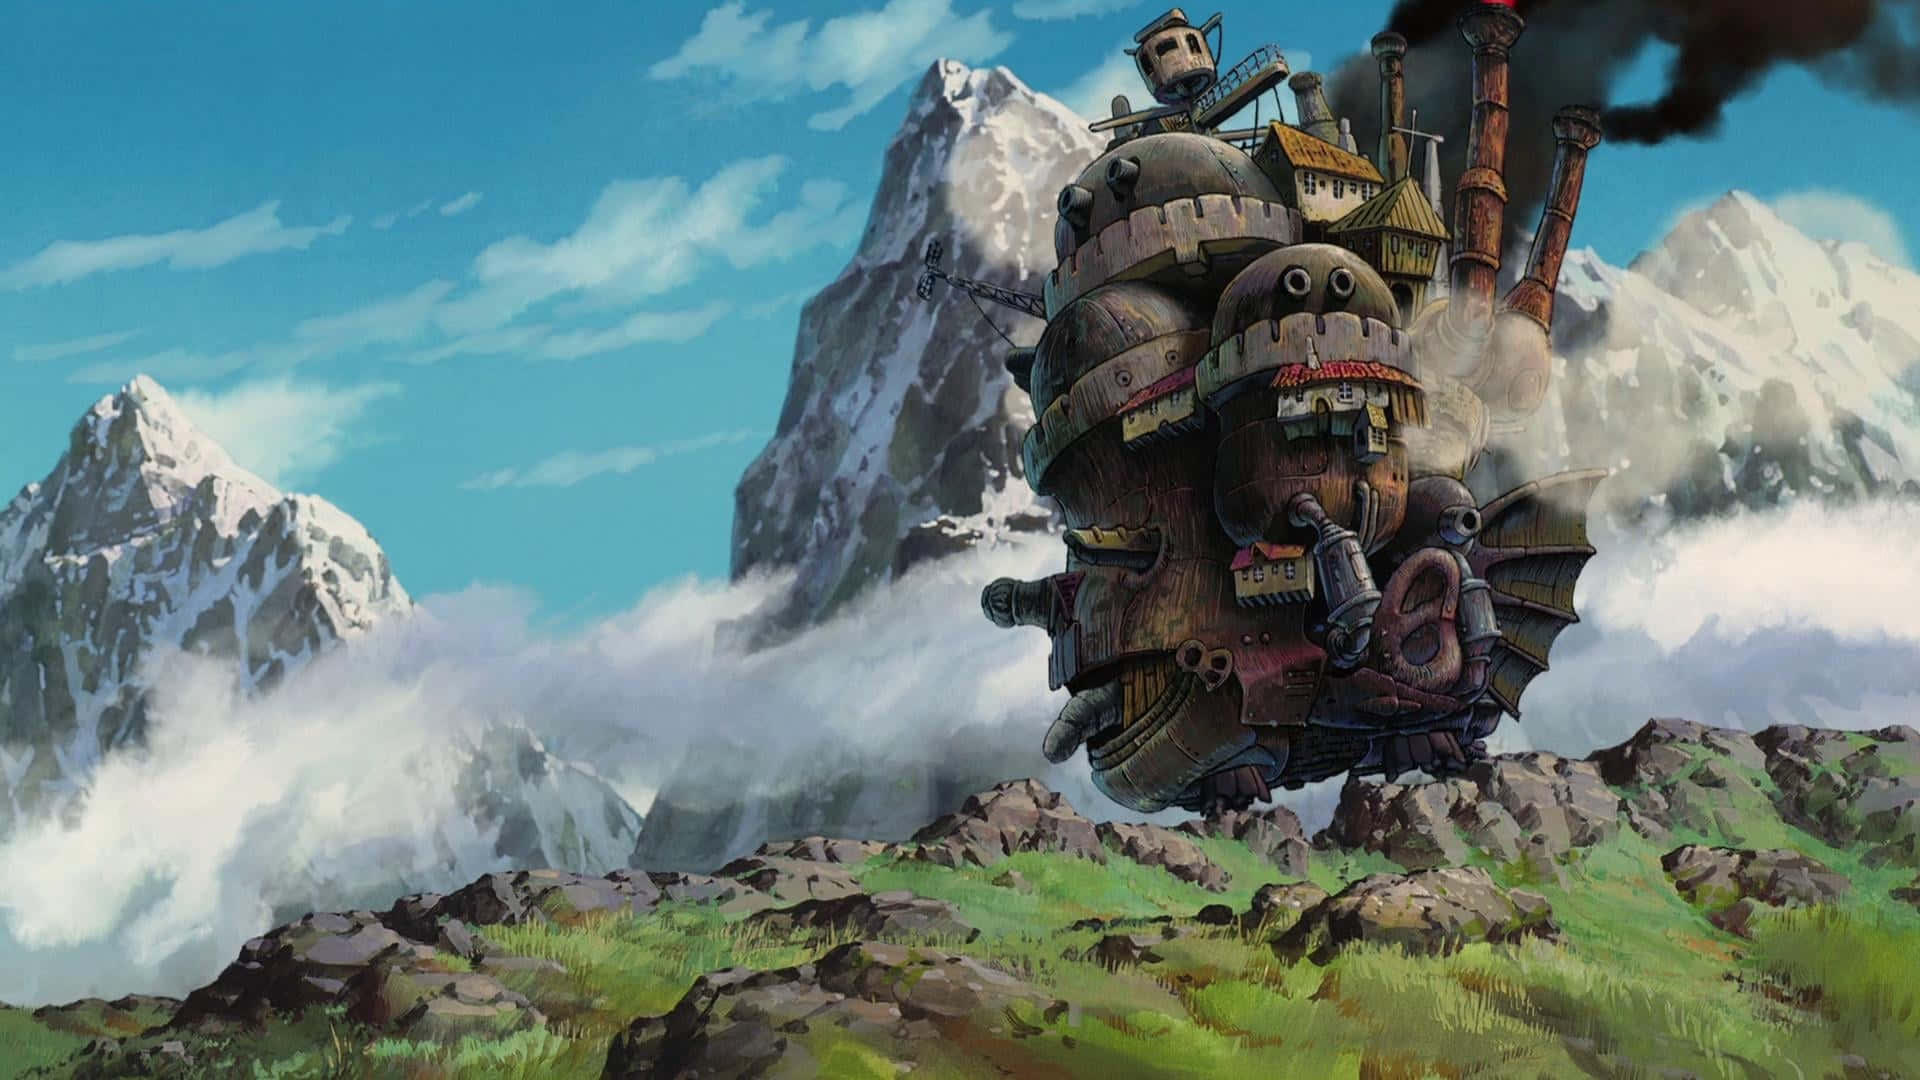 Howl's Moving Castle – A mythical adventure of courage and magical discovery.